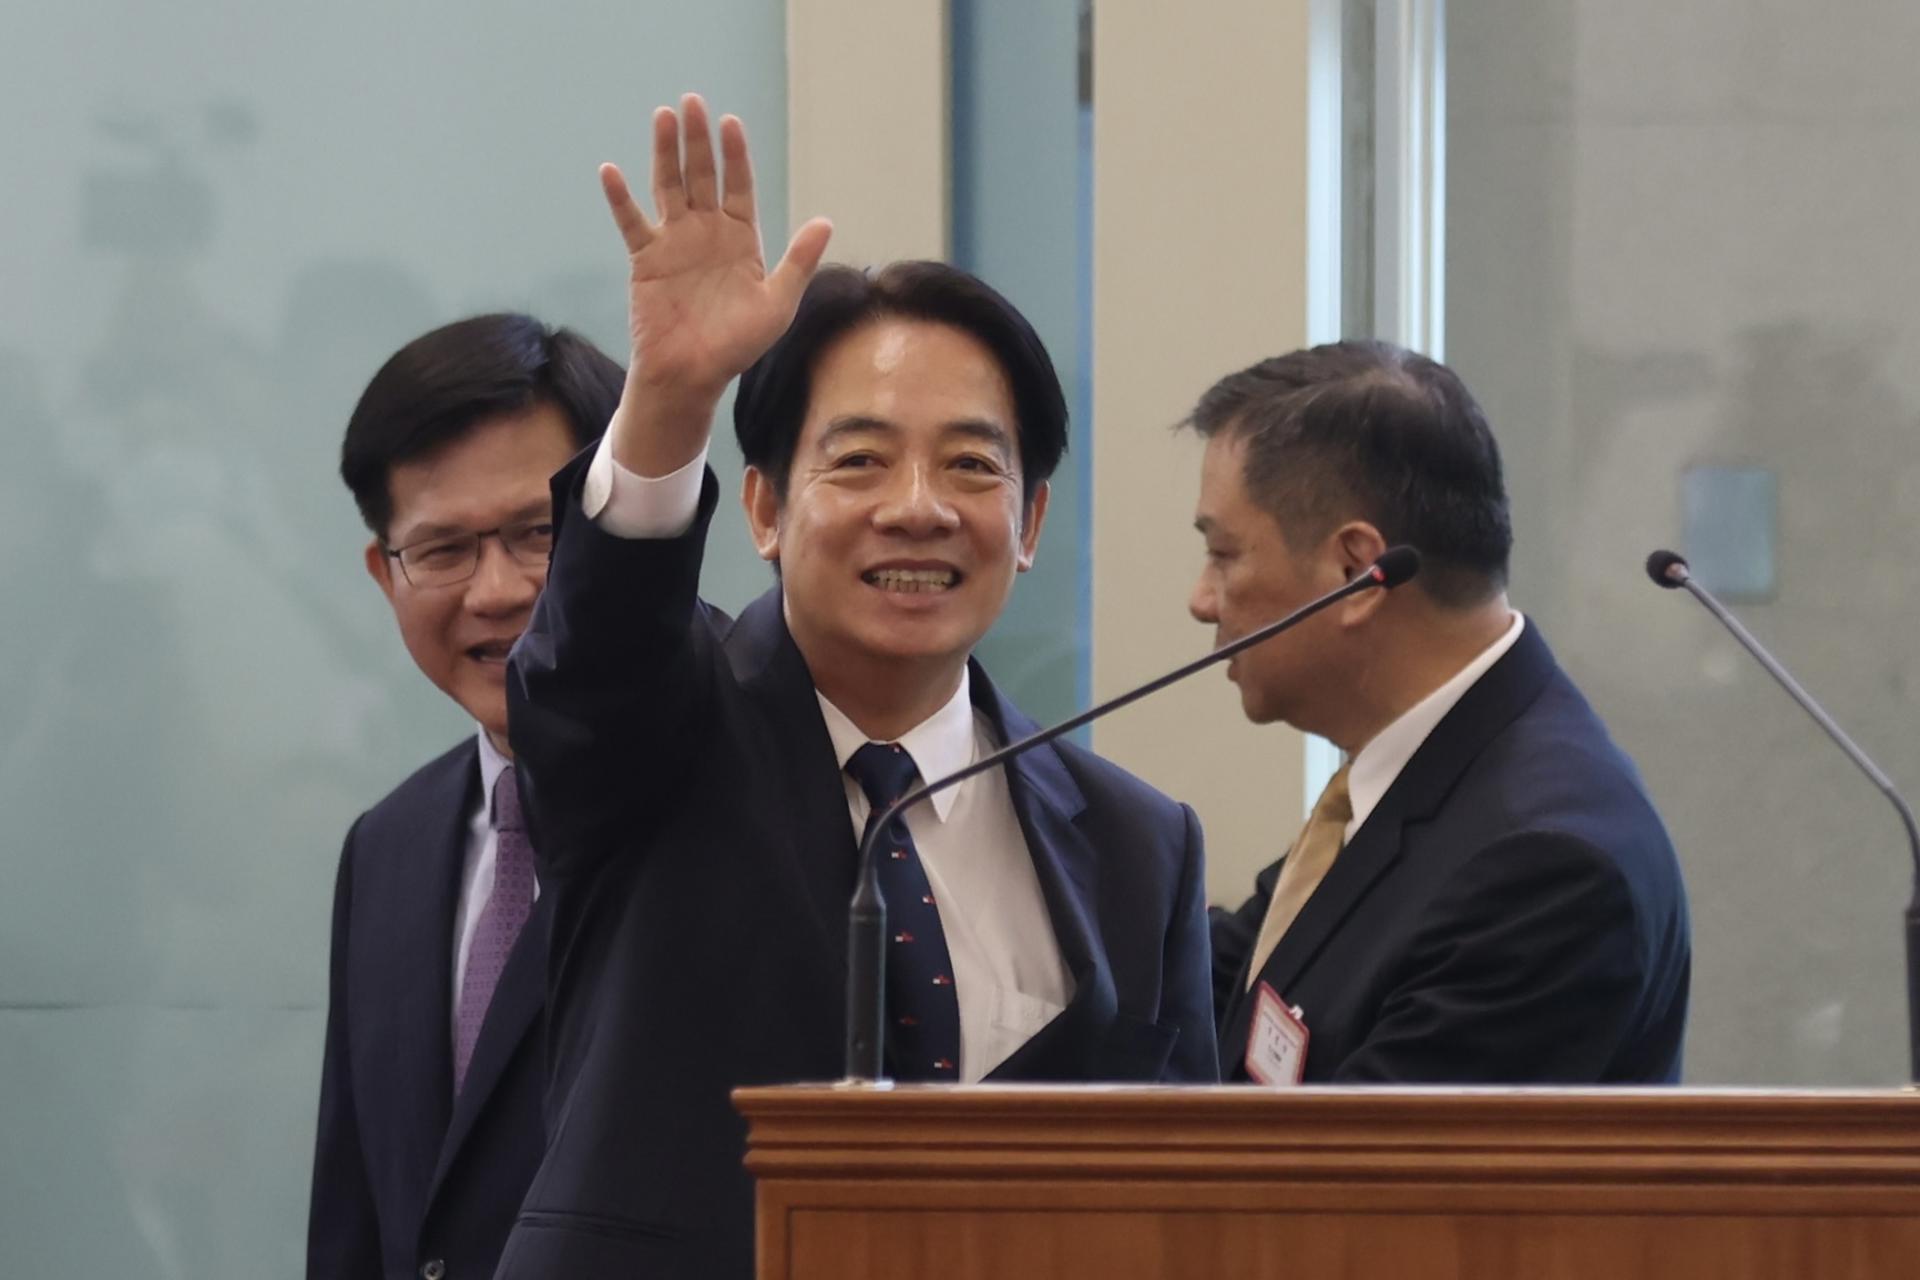 Taiwan's Vice President William Lai (L) waves after his speech prior to his departure to Paraguay inside the Terminal of Taoyuan international Airport in Taoyuan, Taiwan, 12 August 2023. EFE-EPA/RITCHIE B. TONGO